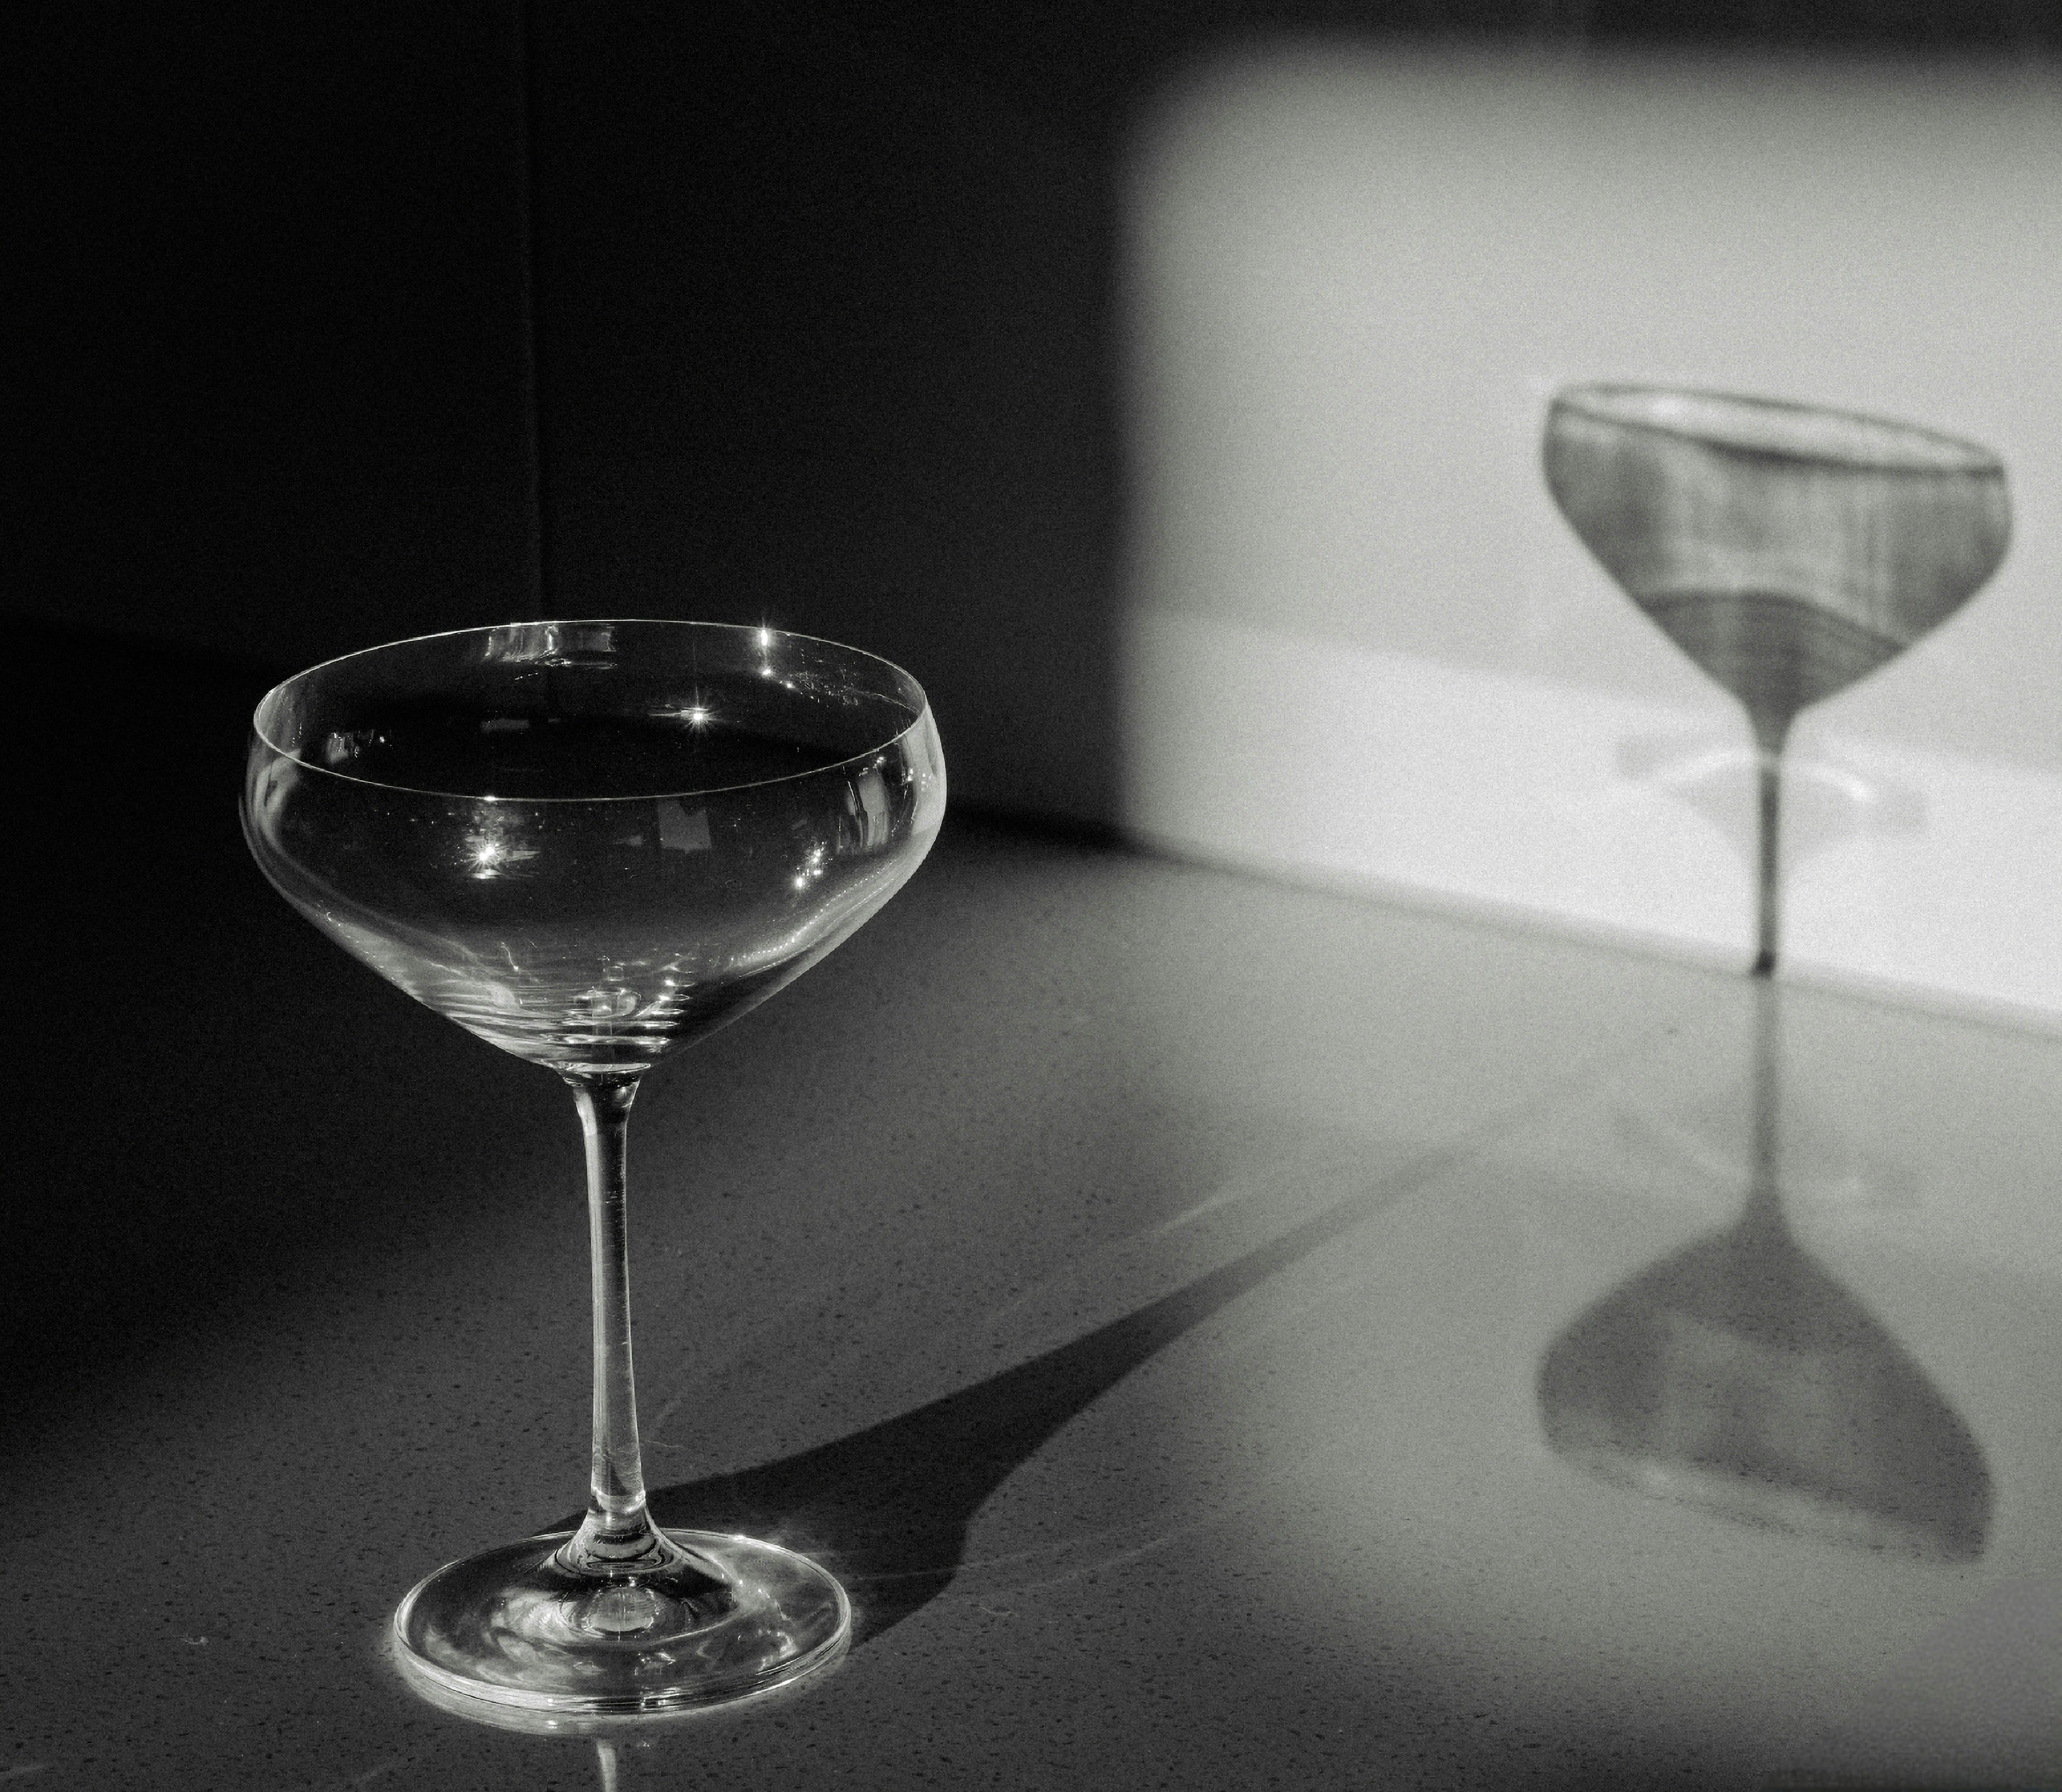 https://images.pexels.com/photos/16196149/pexels-photo-16196149/free-photo-of-black-and-white-photo-of-martini-glass-casting-shadow-on-wall.jpeg